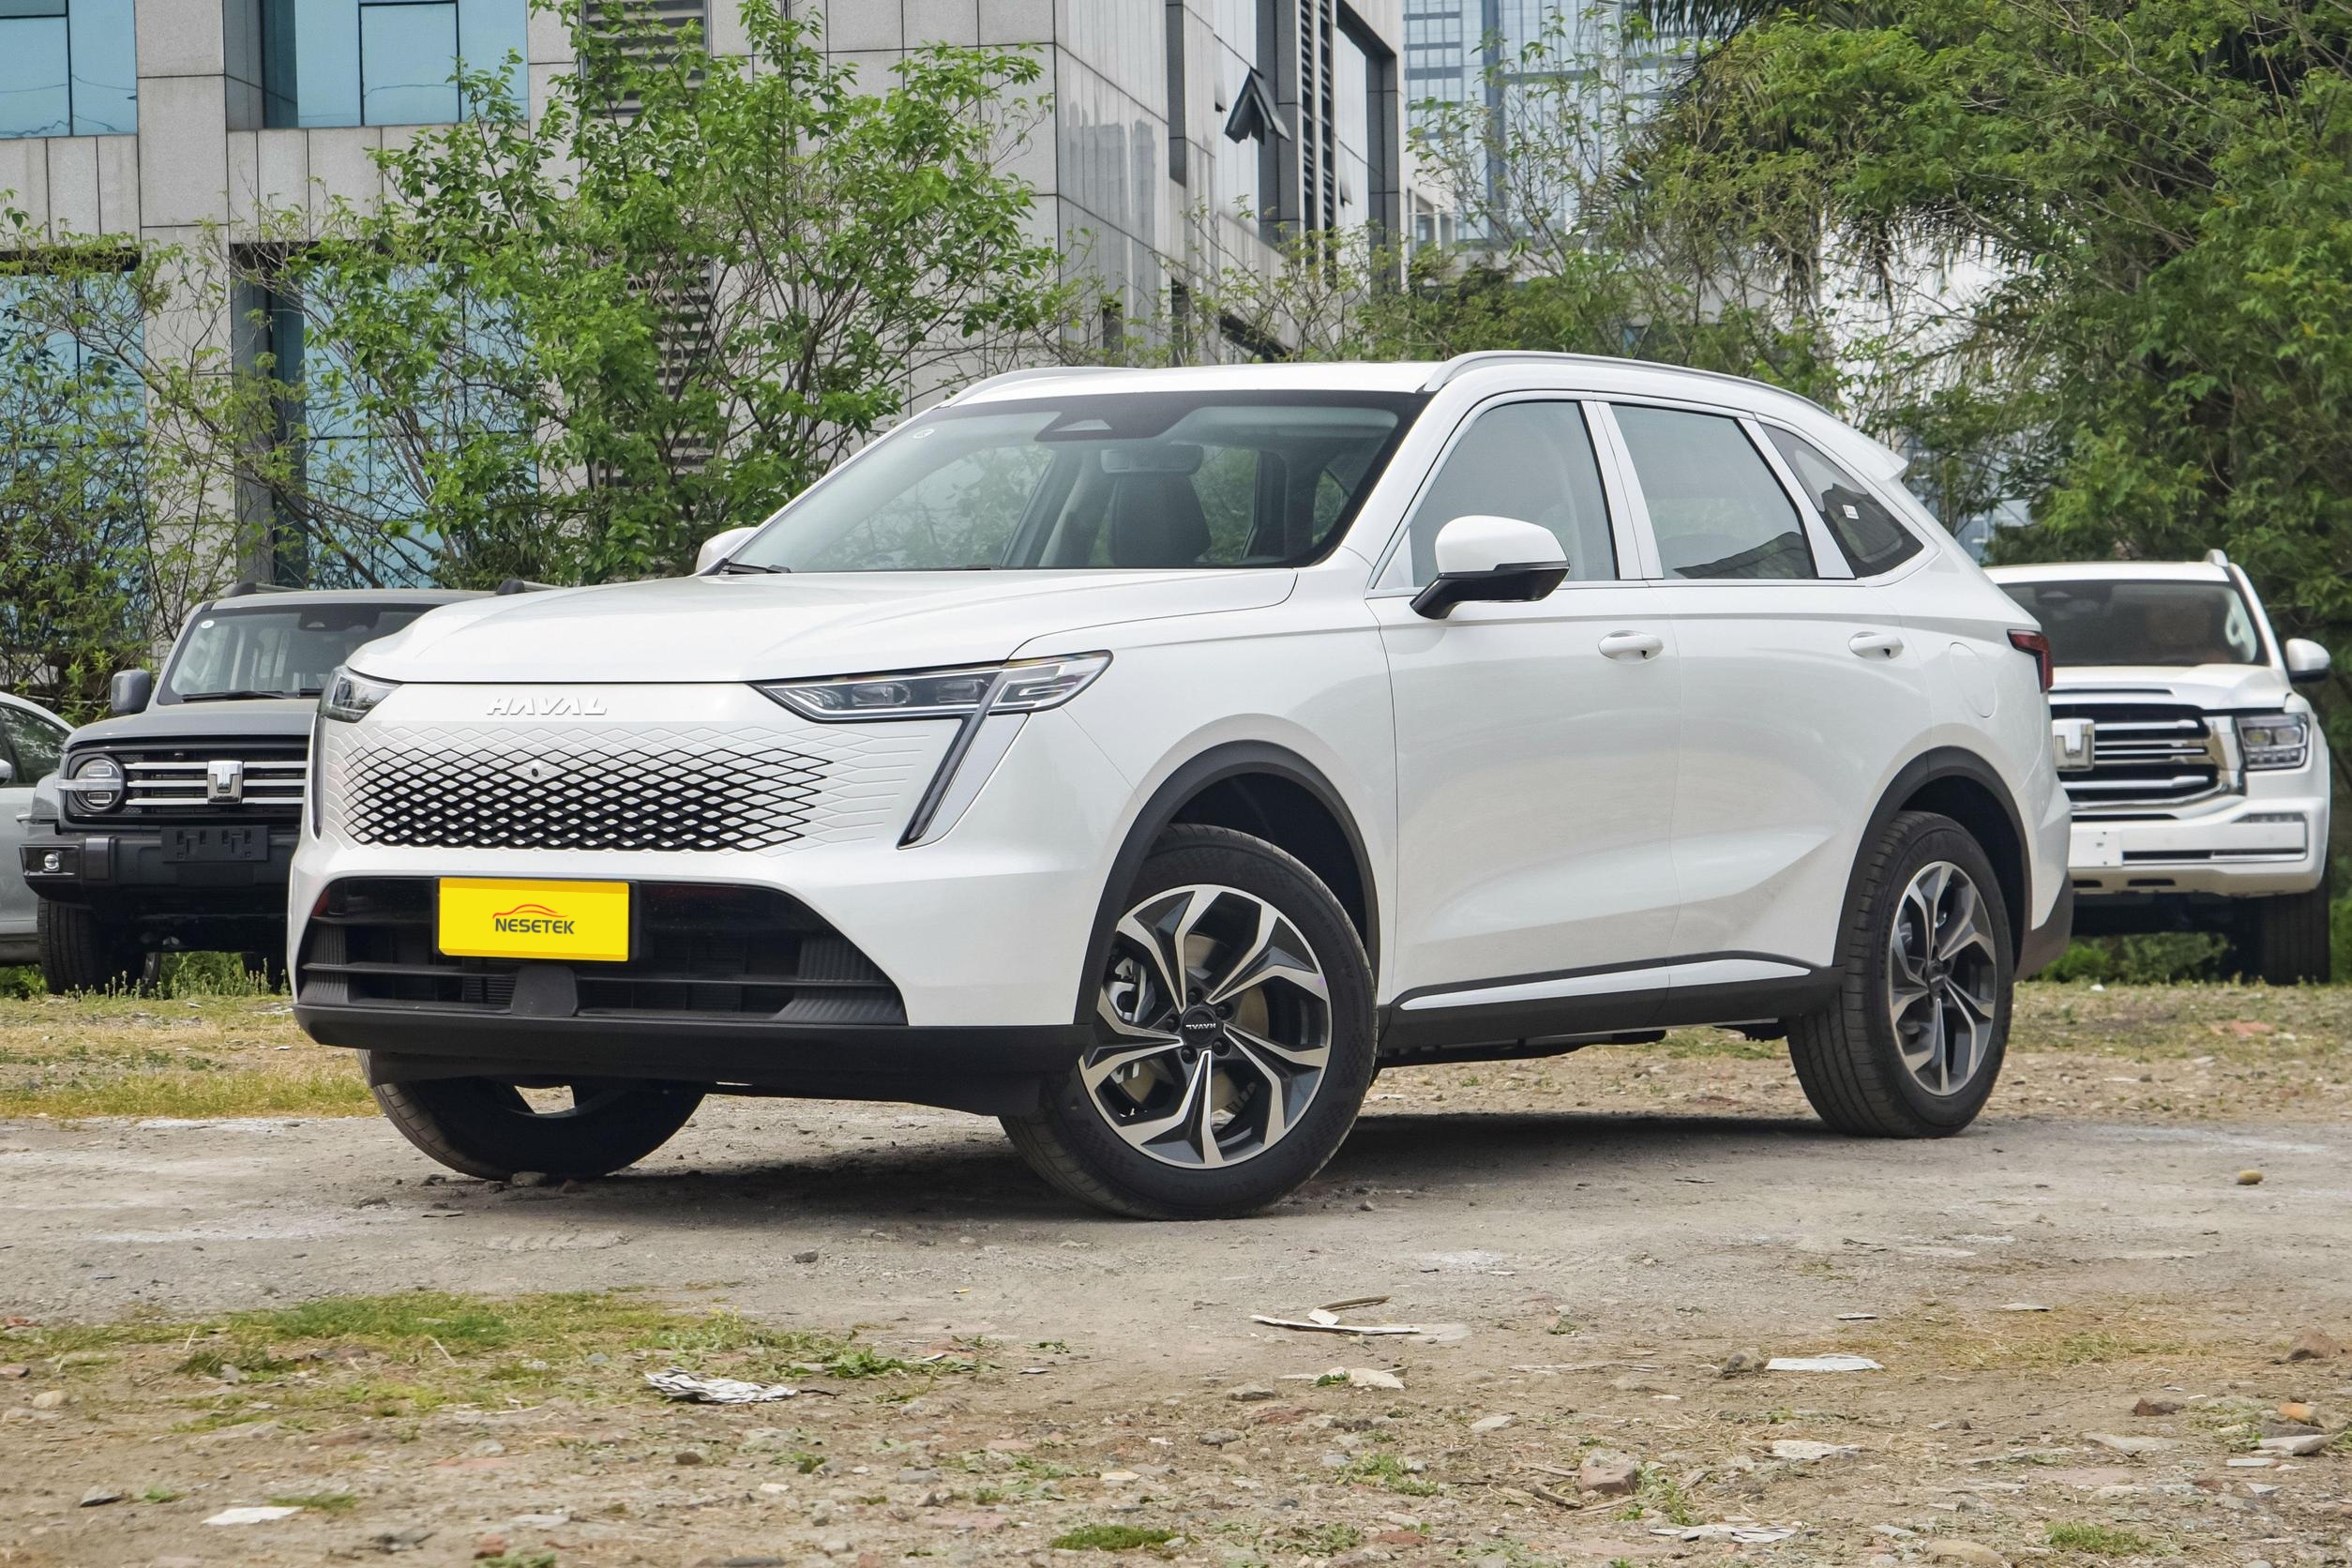 HAVAL Xiaolong Max PHEV SUV New Hybrid Cars GWM 4×4 4WD Vehicles Automobile China